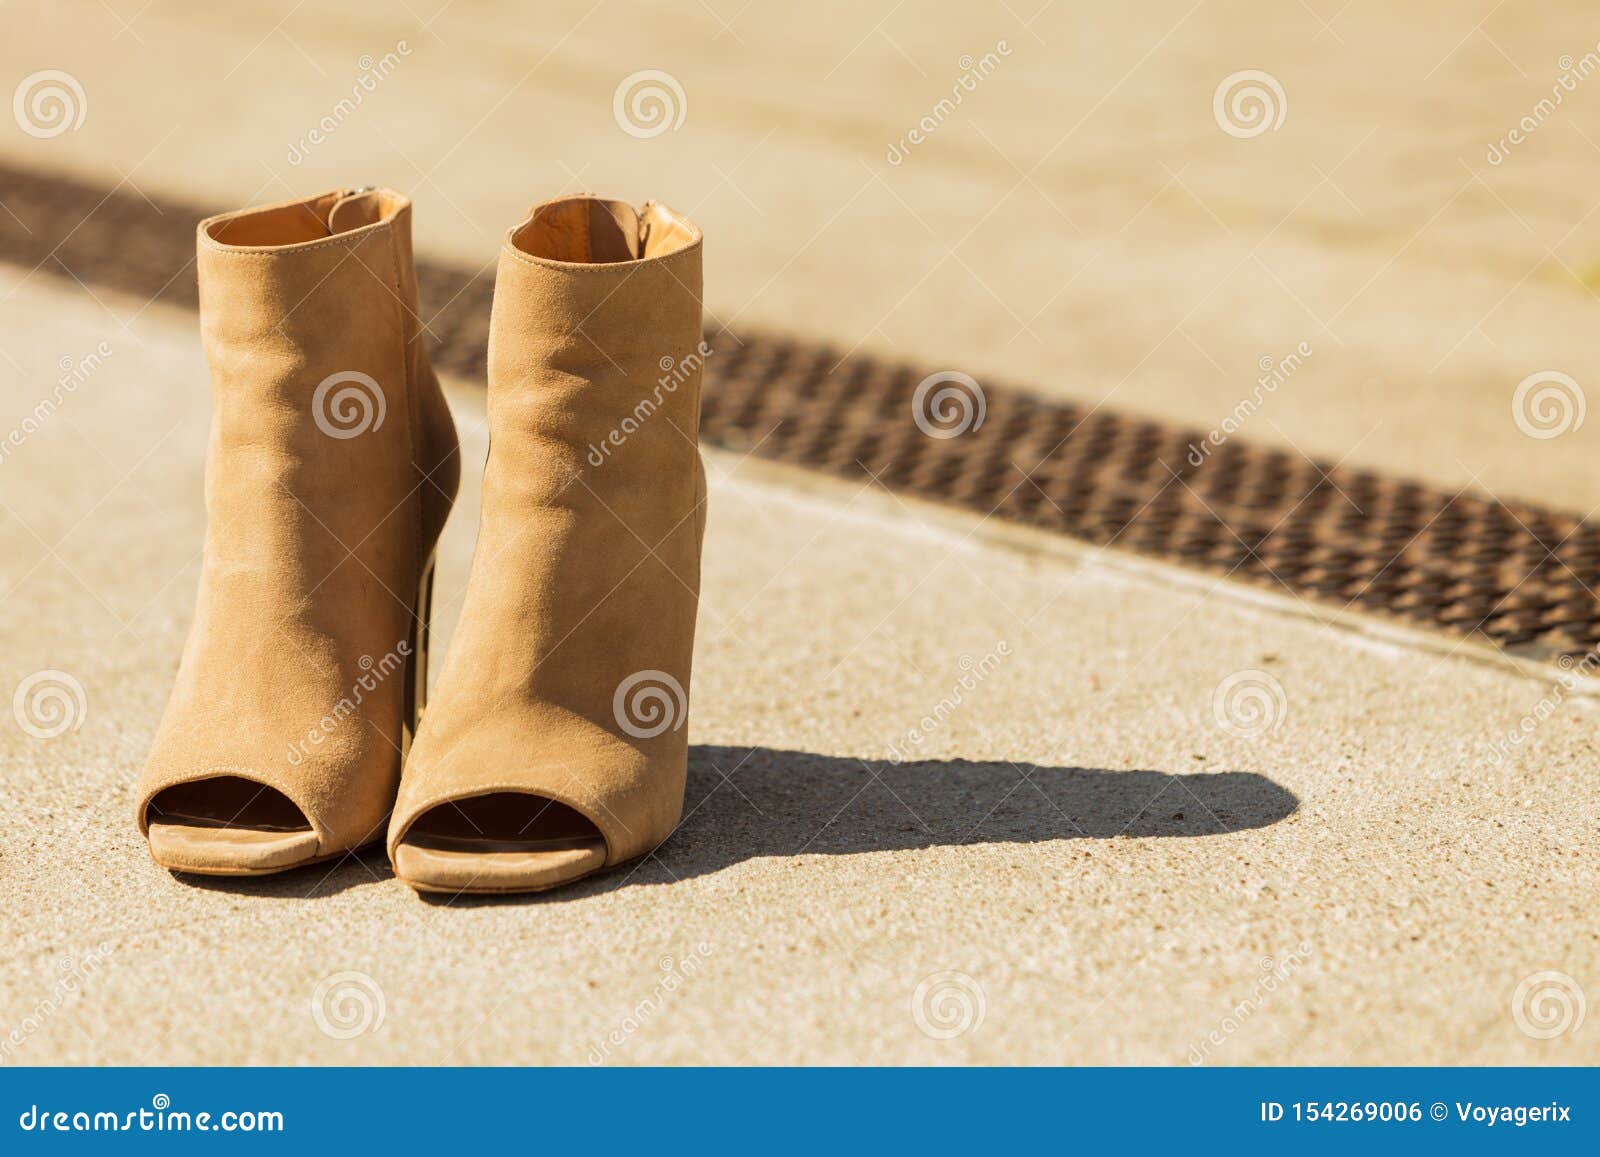 Brown Boots with High Heels and Peep Toes Stock Photo - Image of brown ...